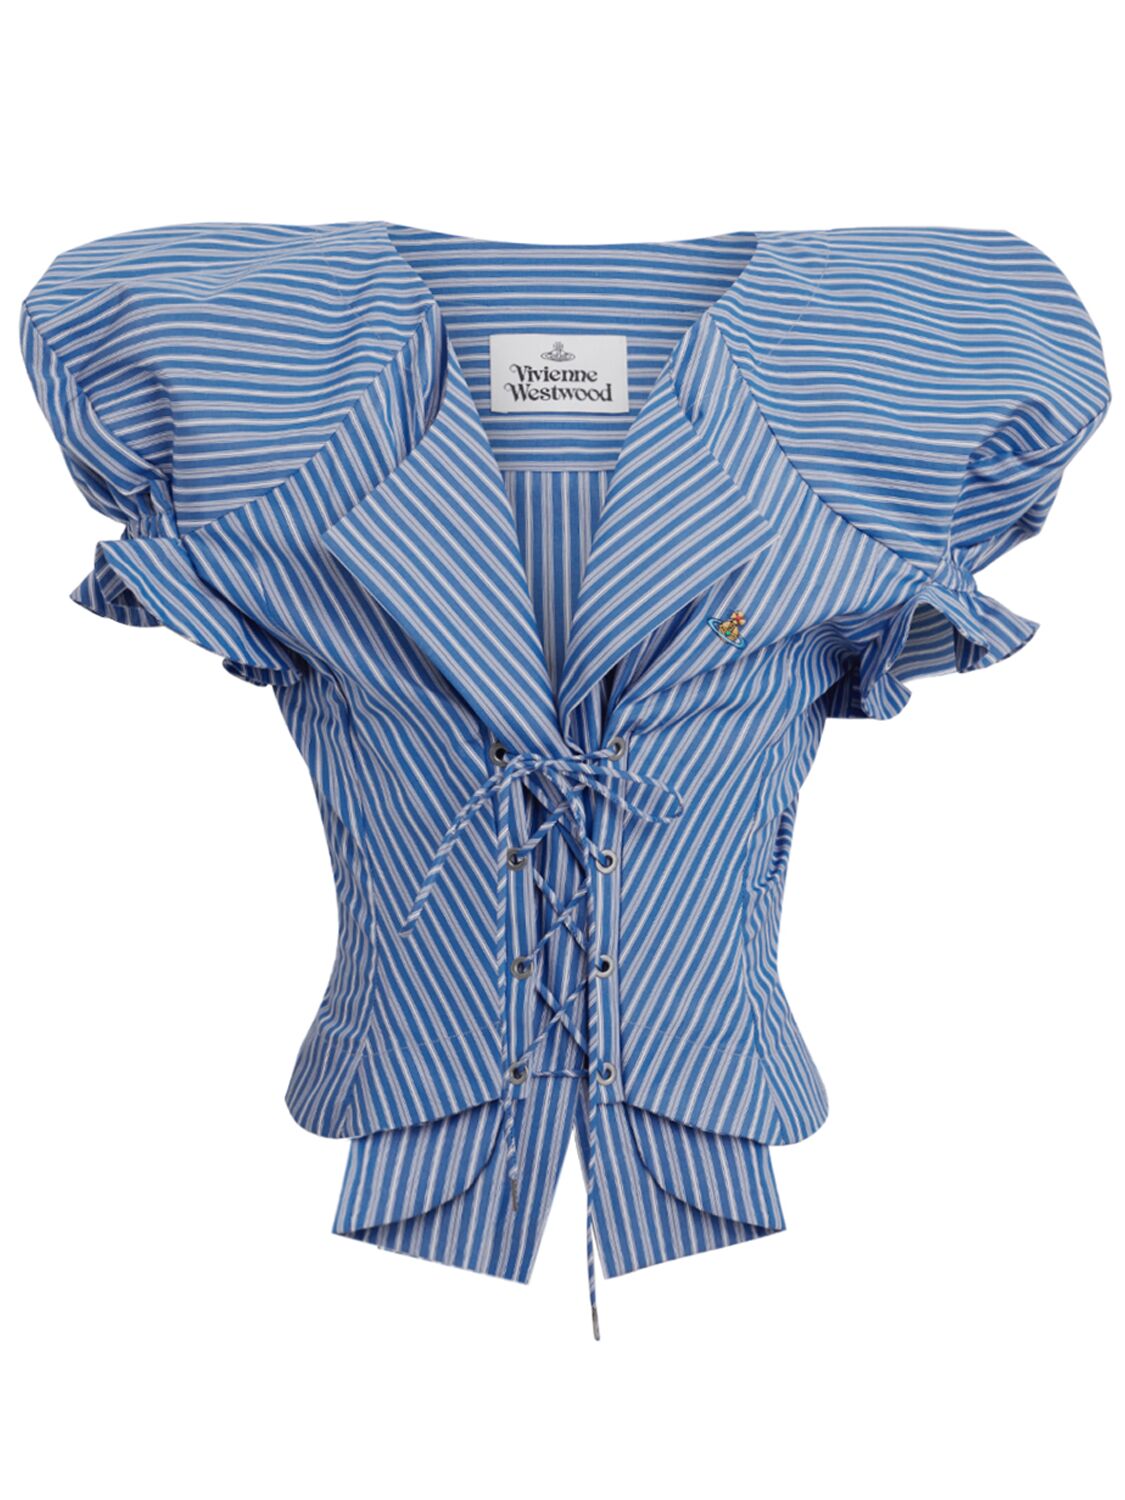 Vivienne Westwood Kate Striped Cotton Lace-up Top In Light Blue,white